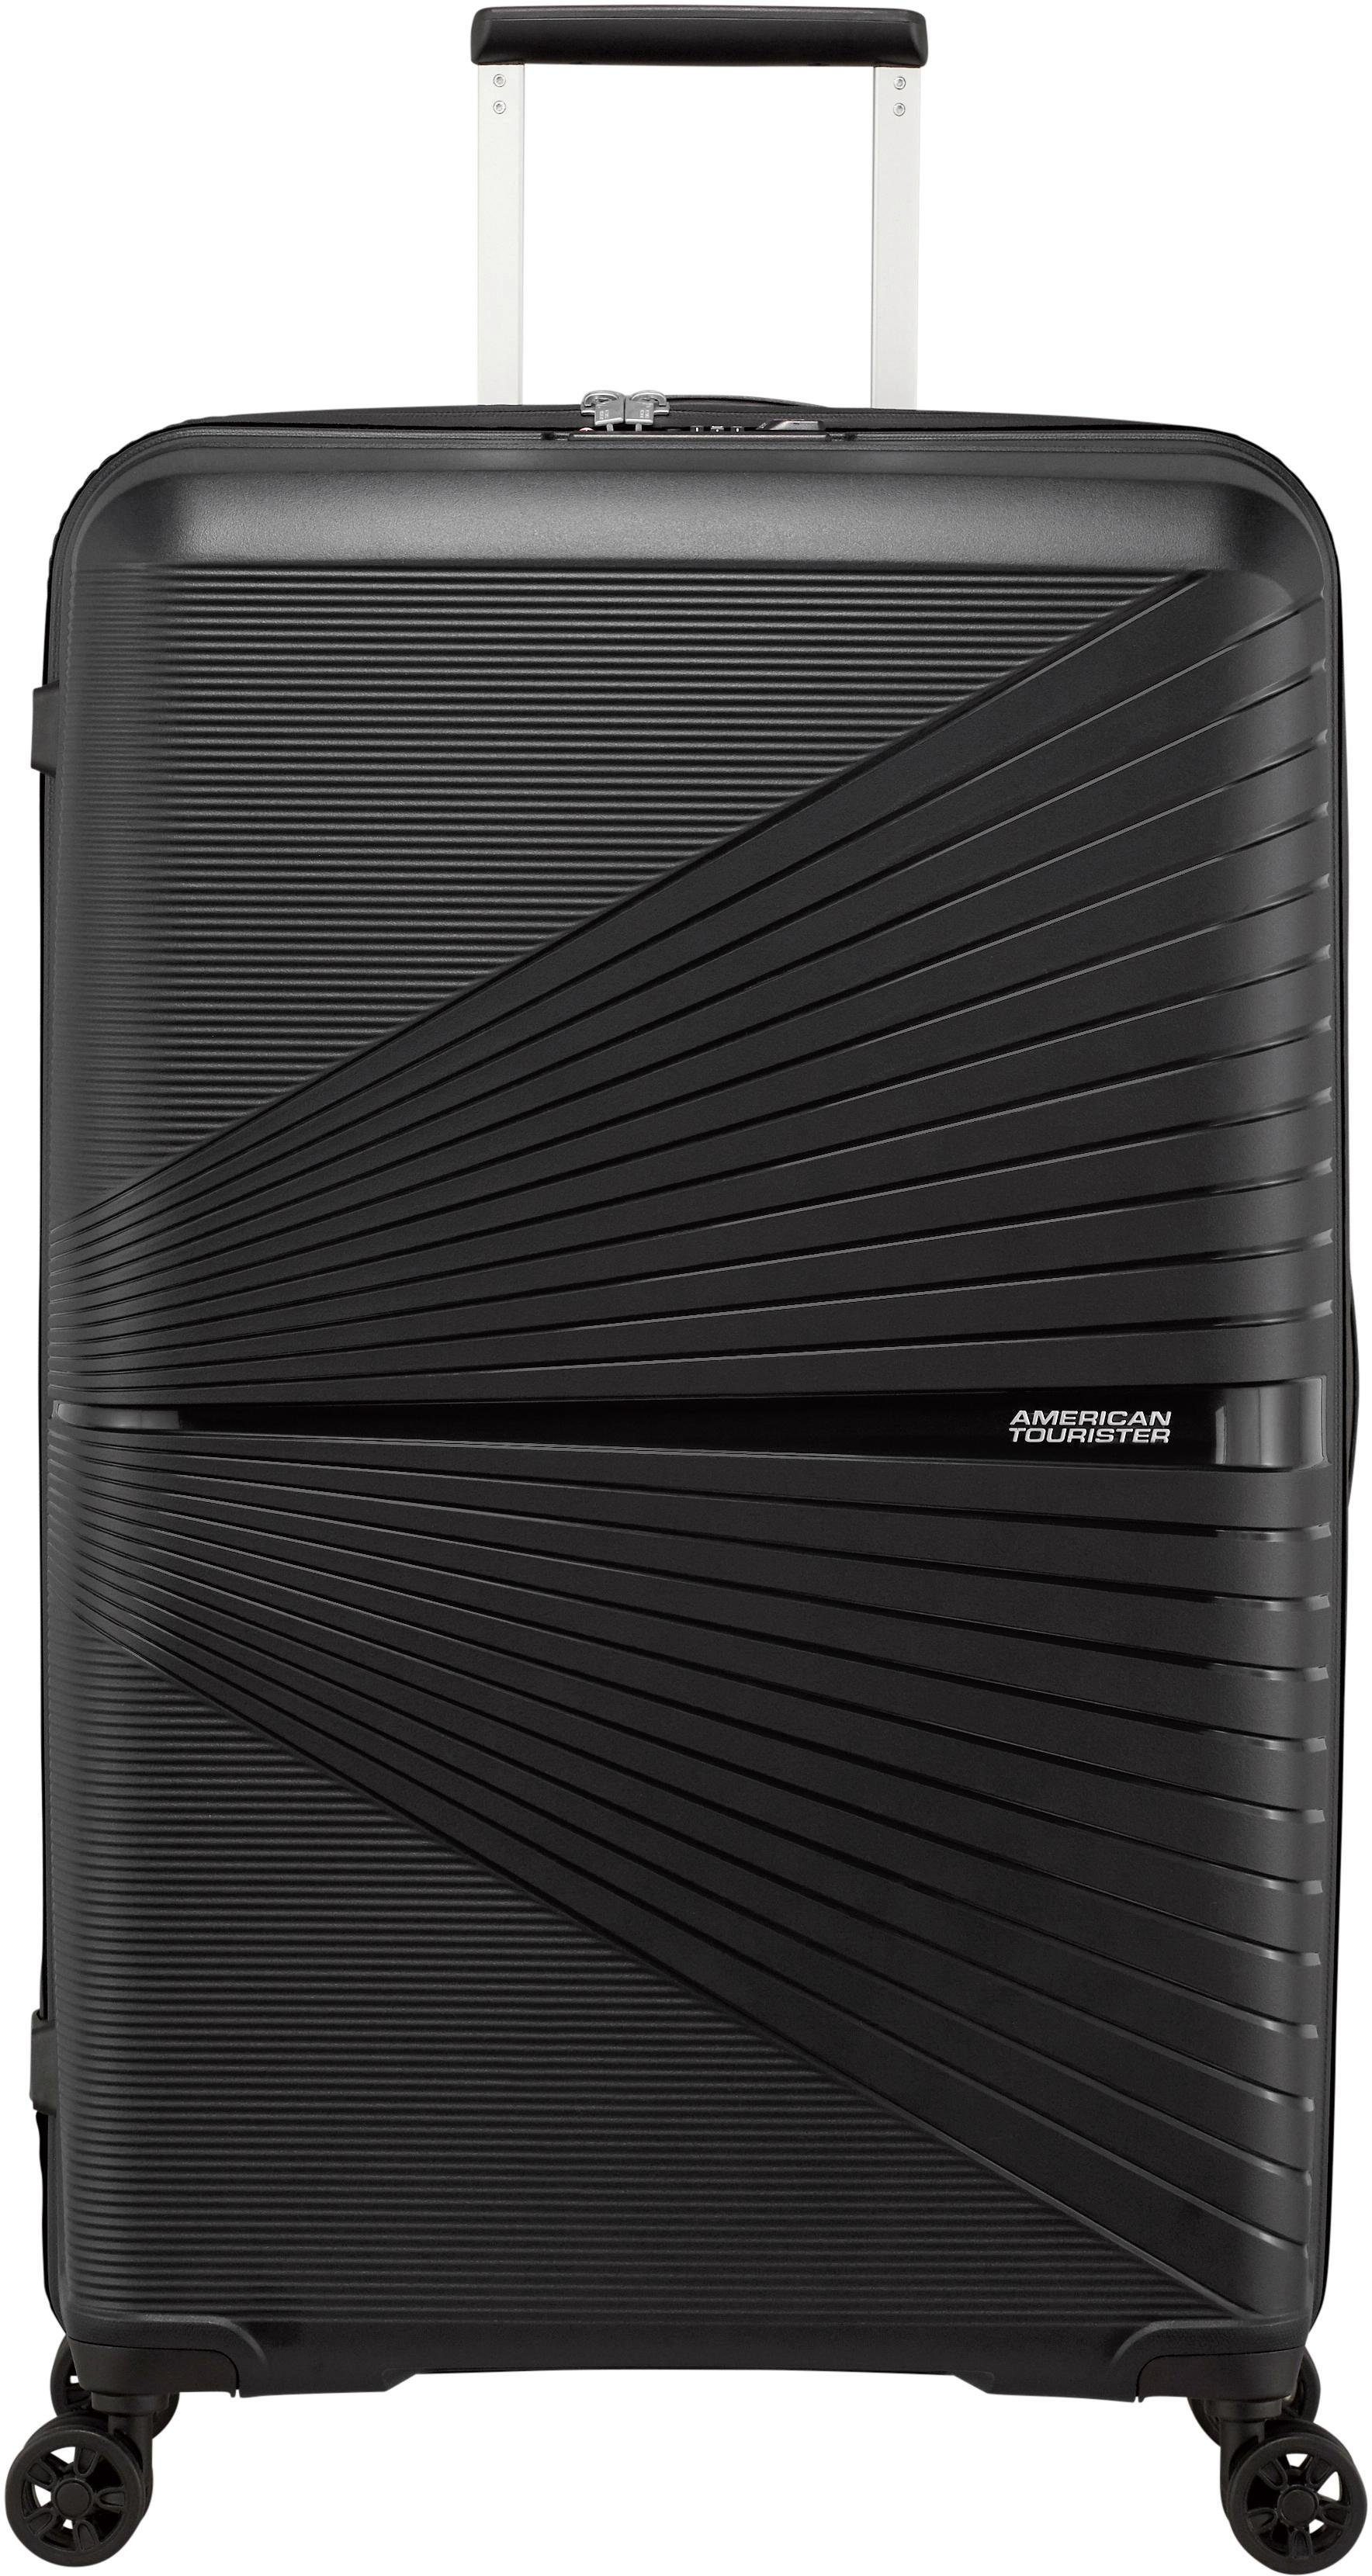 American Tourister® Koffer AIRCONIC Spinner 77, 4 Rollen Onyx Black